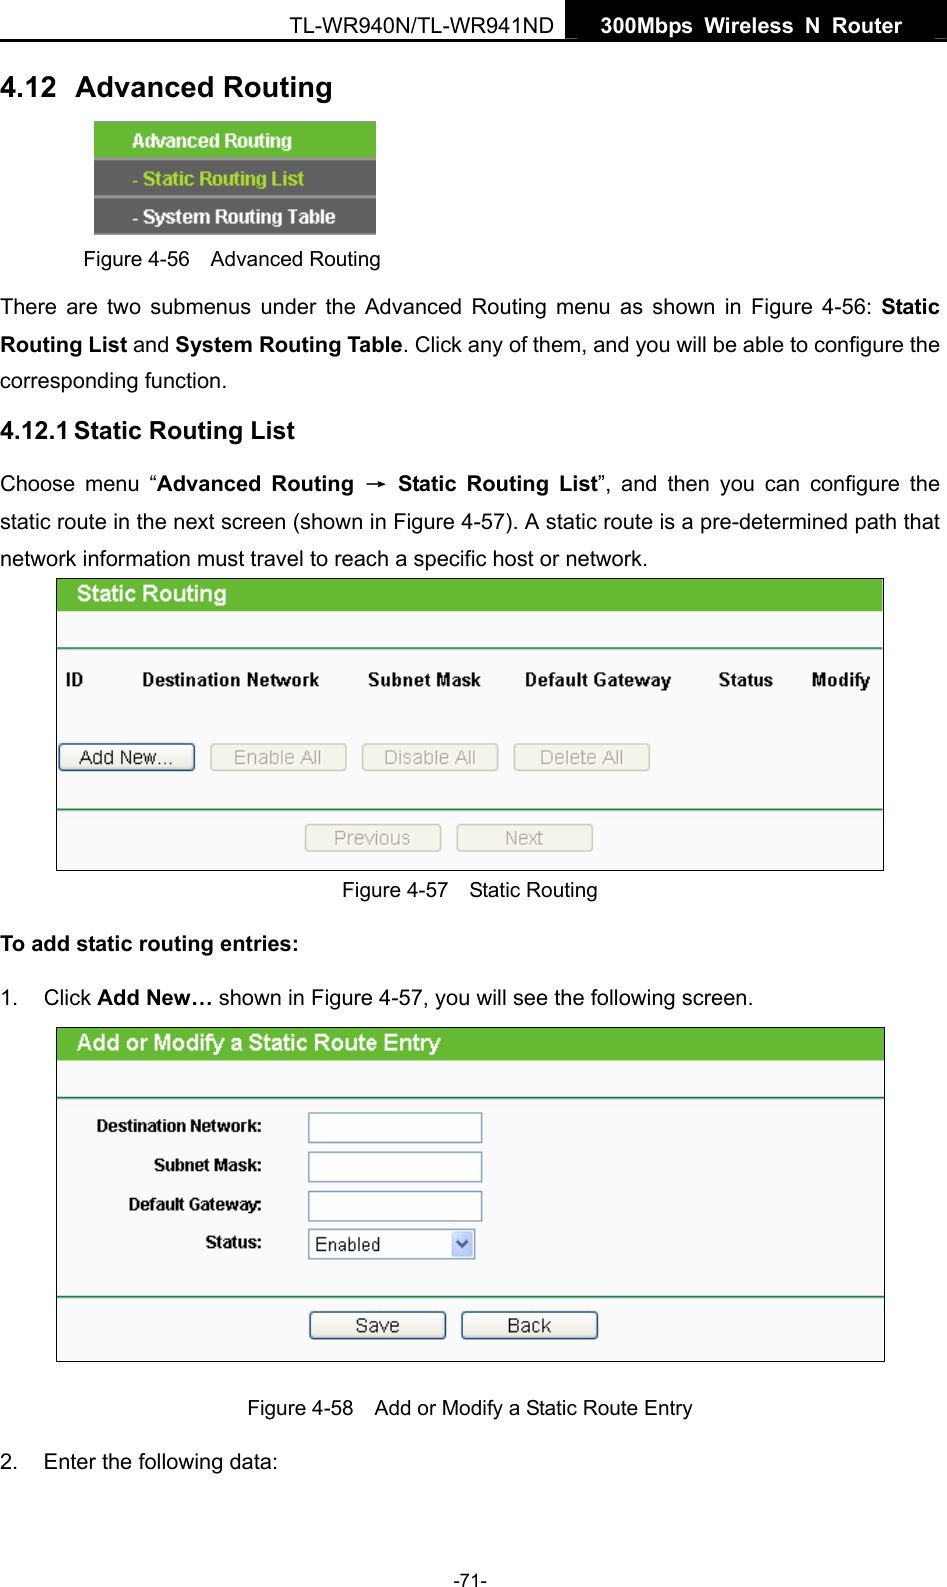   300Mbps Wireless N Router  TL-WR940N/TL-WR941ND -71- 4.12  Advanced Routing  Figure 4-56  Advanced Routing There are two submenus under the Advanced Routing menu as shown in Figure 4-56:  Static Routing List and System Routing Table. Click any of them, and you will be able to configure the corresponding function. 4.12.1 Static Routing List Choose menu “Advanced Routing → Static Routing List”, and then you can configure the static route in the next screen (shown in Figure 4-57). A static route is a pre-determined path that network information must travel to reach a specific host or network.  Figure 4-57  Static Routing To add static routing entries: 1. Click Add New… shown in Figure 4-57, you will see the following screen.  Figure 4-58    Add or Modify a Static Route Entry 2.  Enter the following data: 